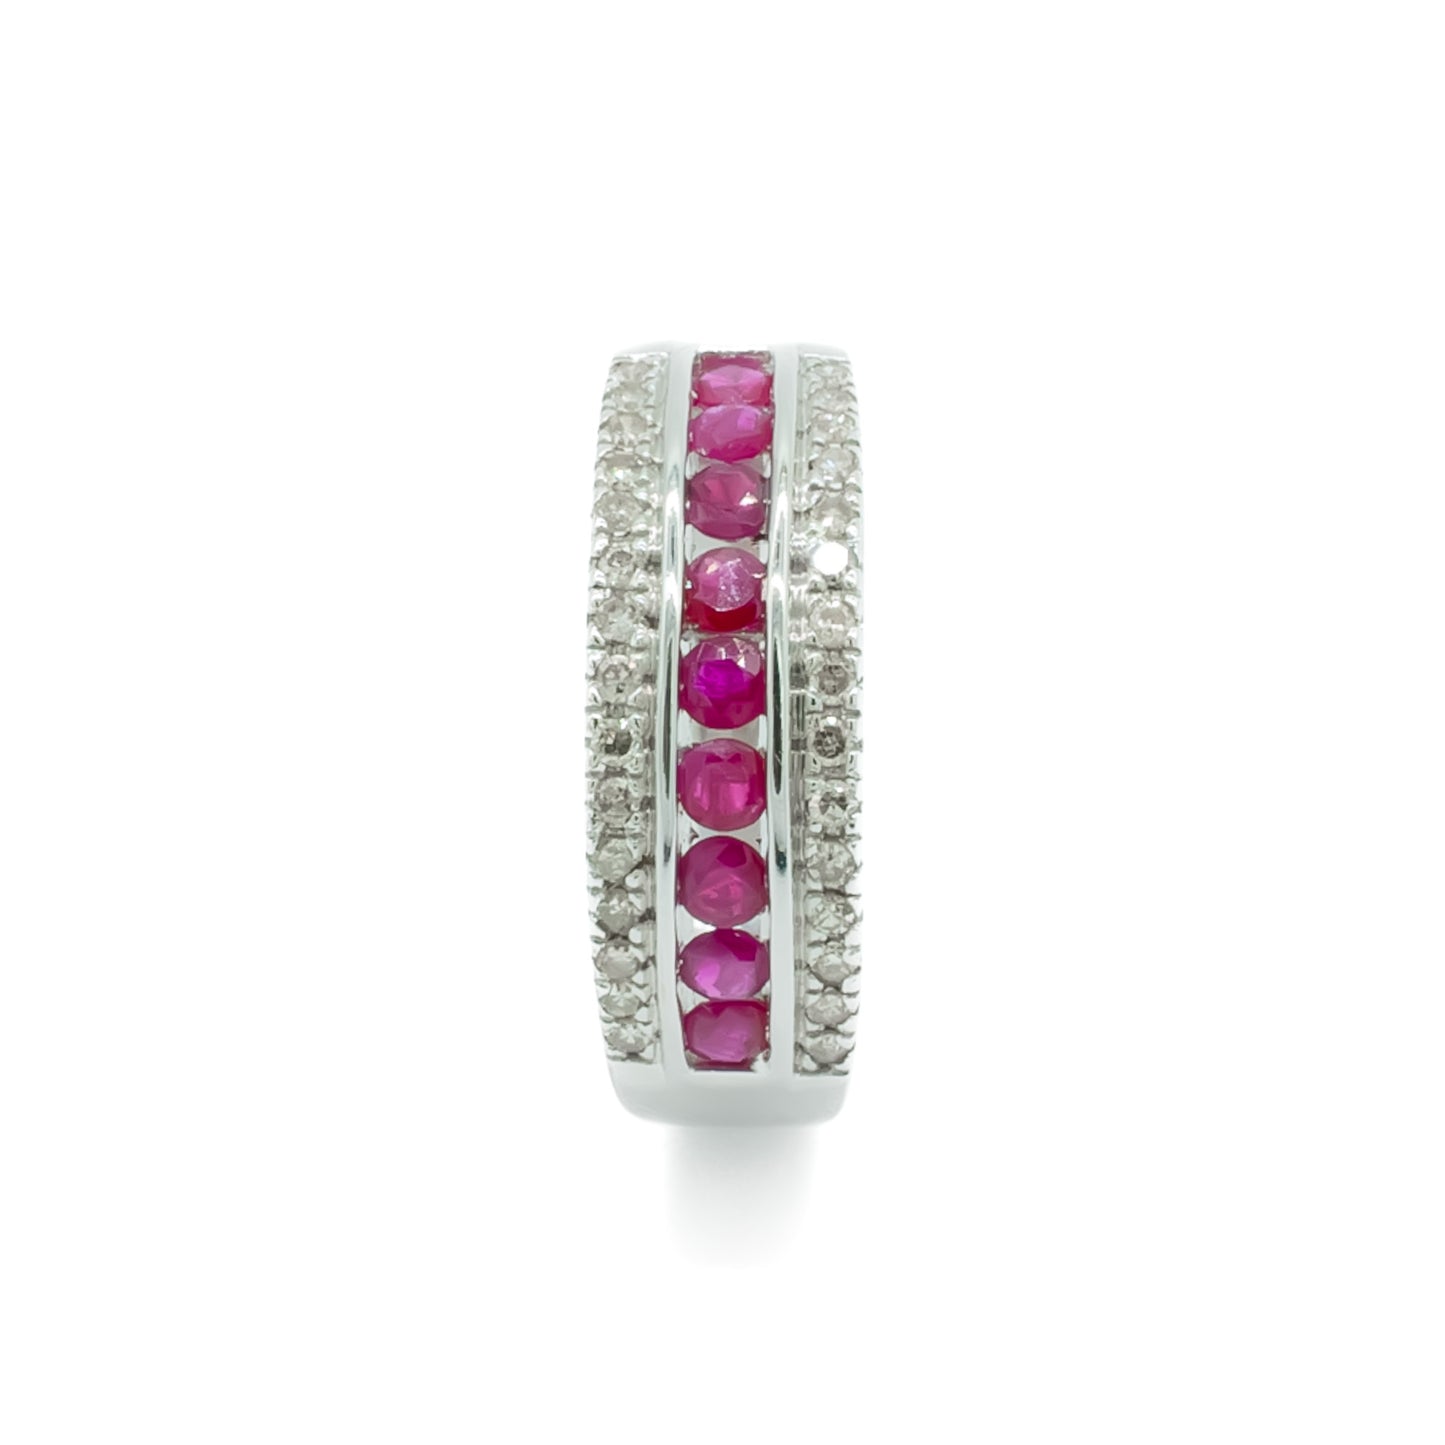 Classic vintage 14ct white gold ring set with nine faceted rubies and two rows of small diamonds. London